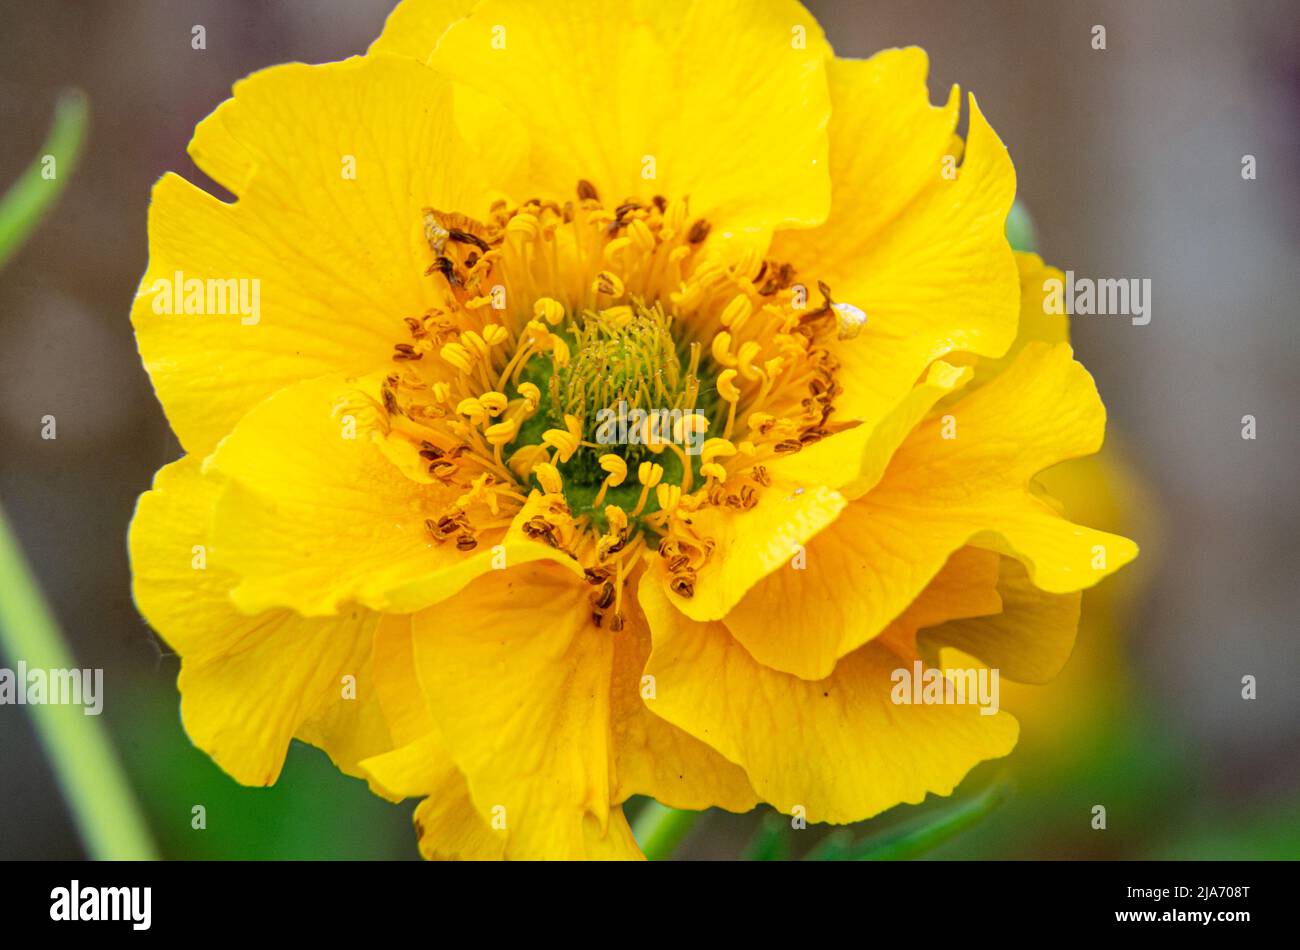 Macro shot of yellow Geum 'Lady Stratheden' flowers in a residential garden. Stock Photo